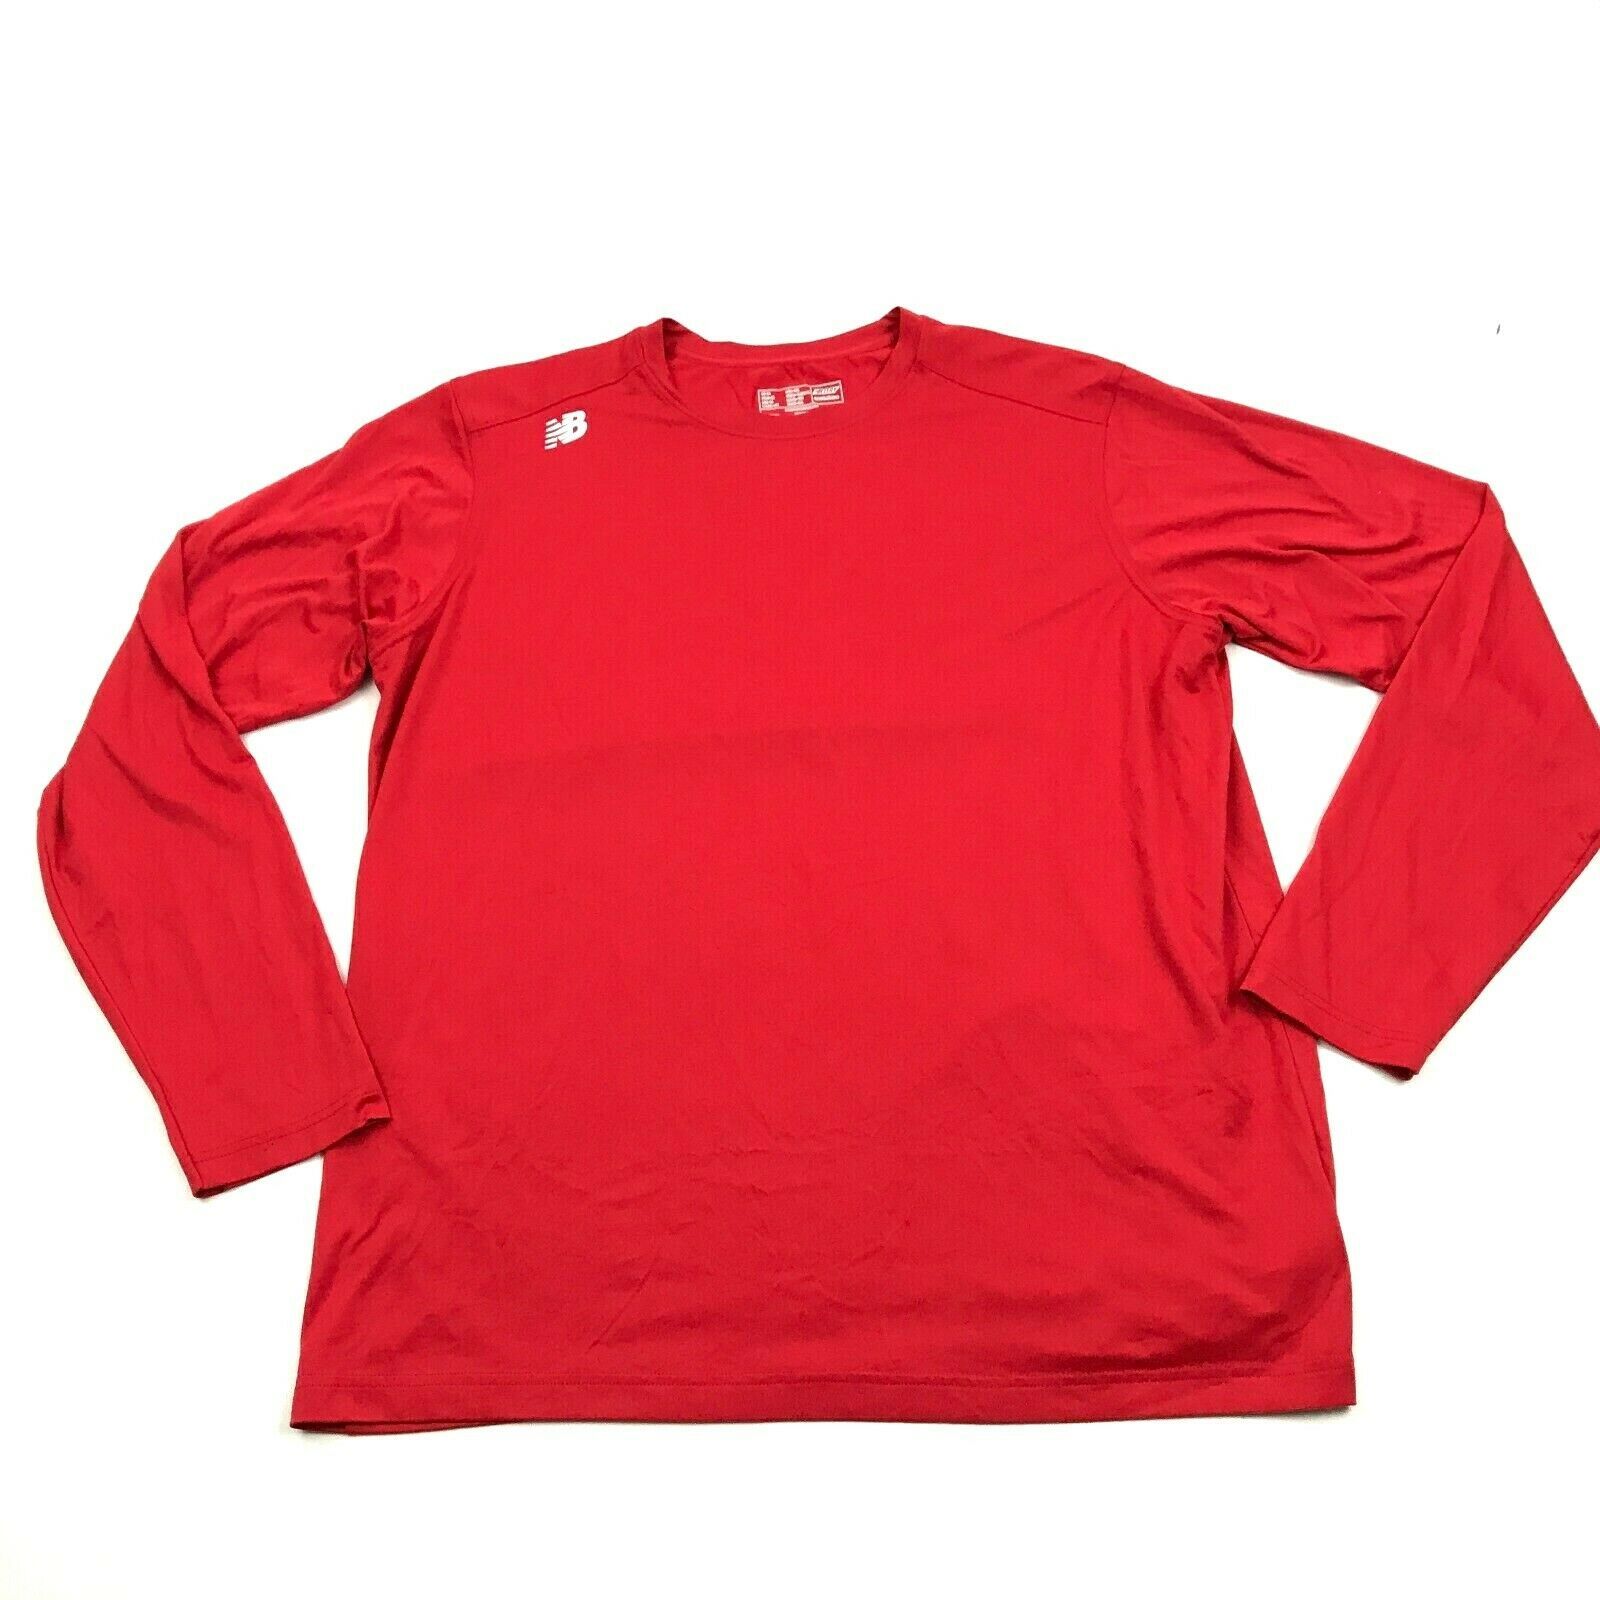 New Balance NB Dry Fit Shirt Men Size XL Extra Large Red Long Sleeve ...